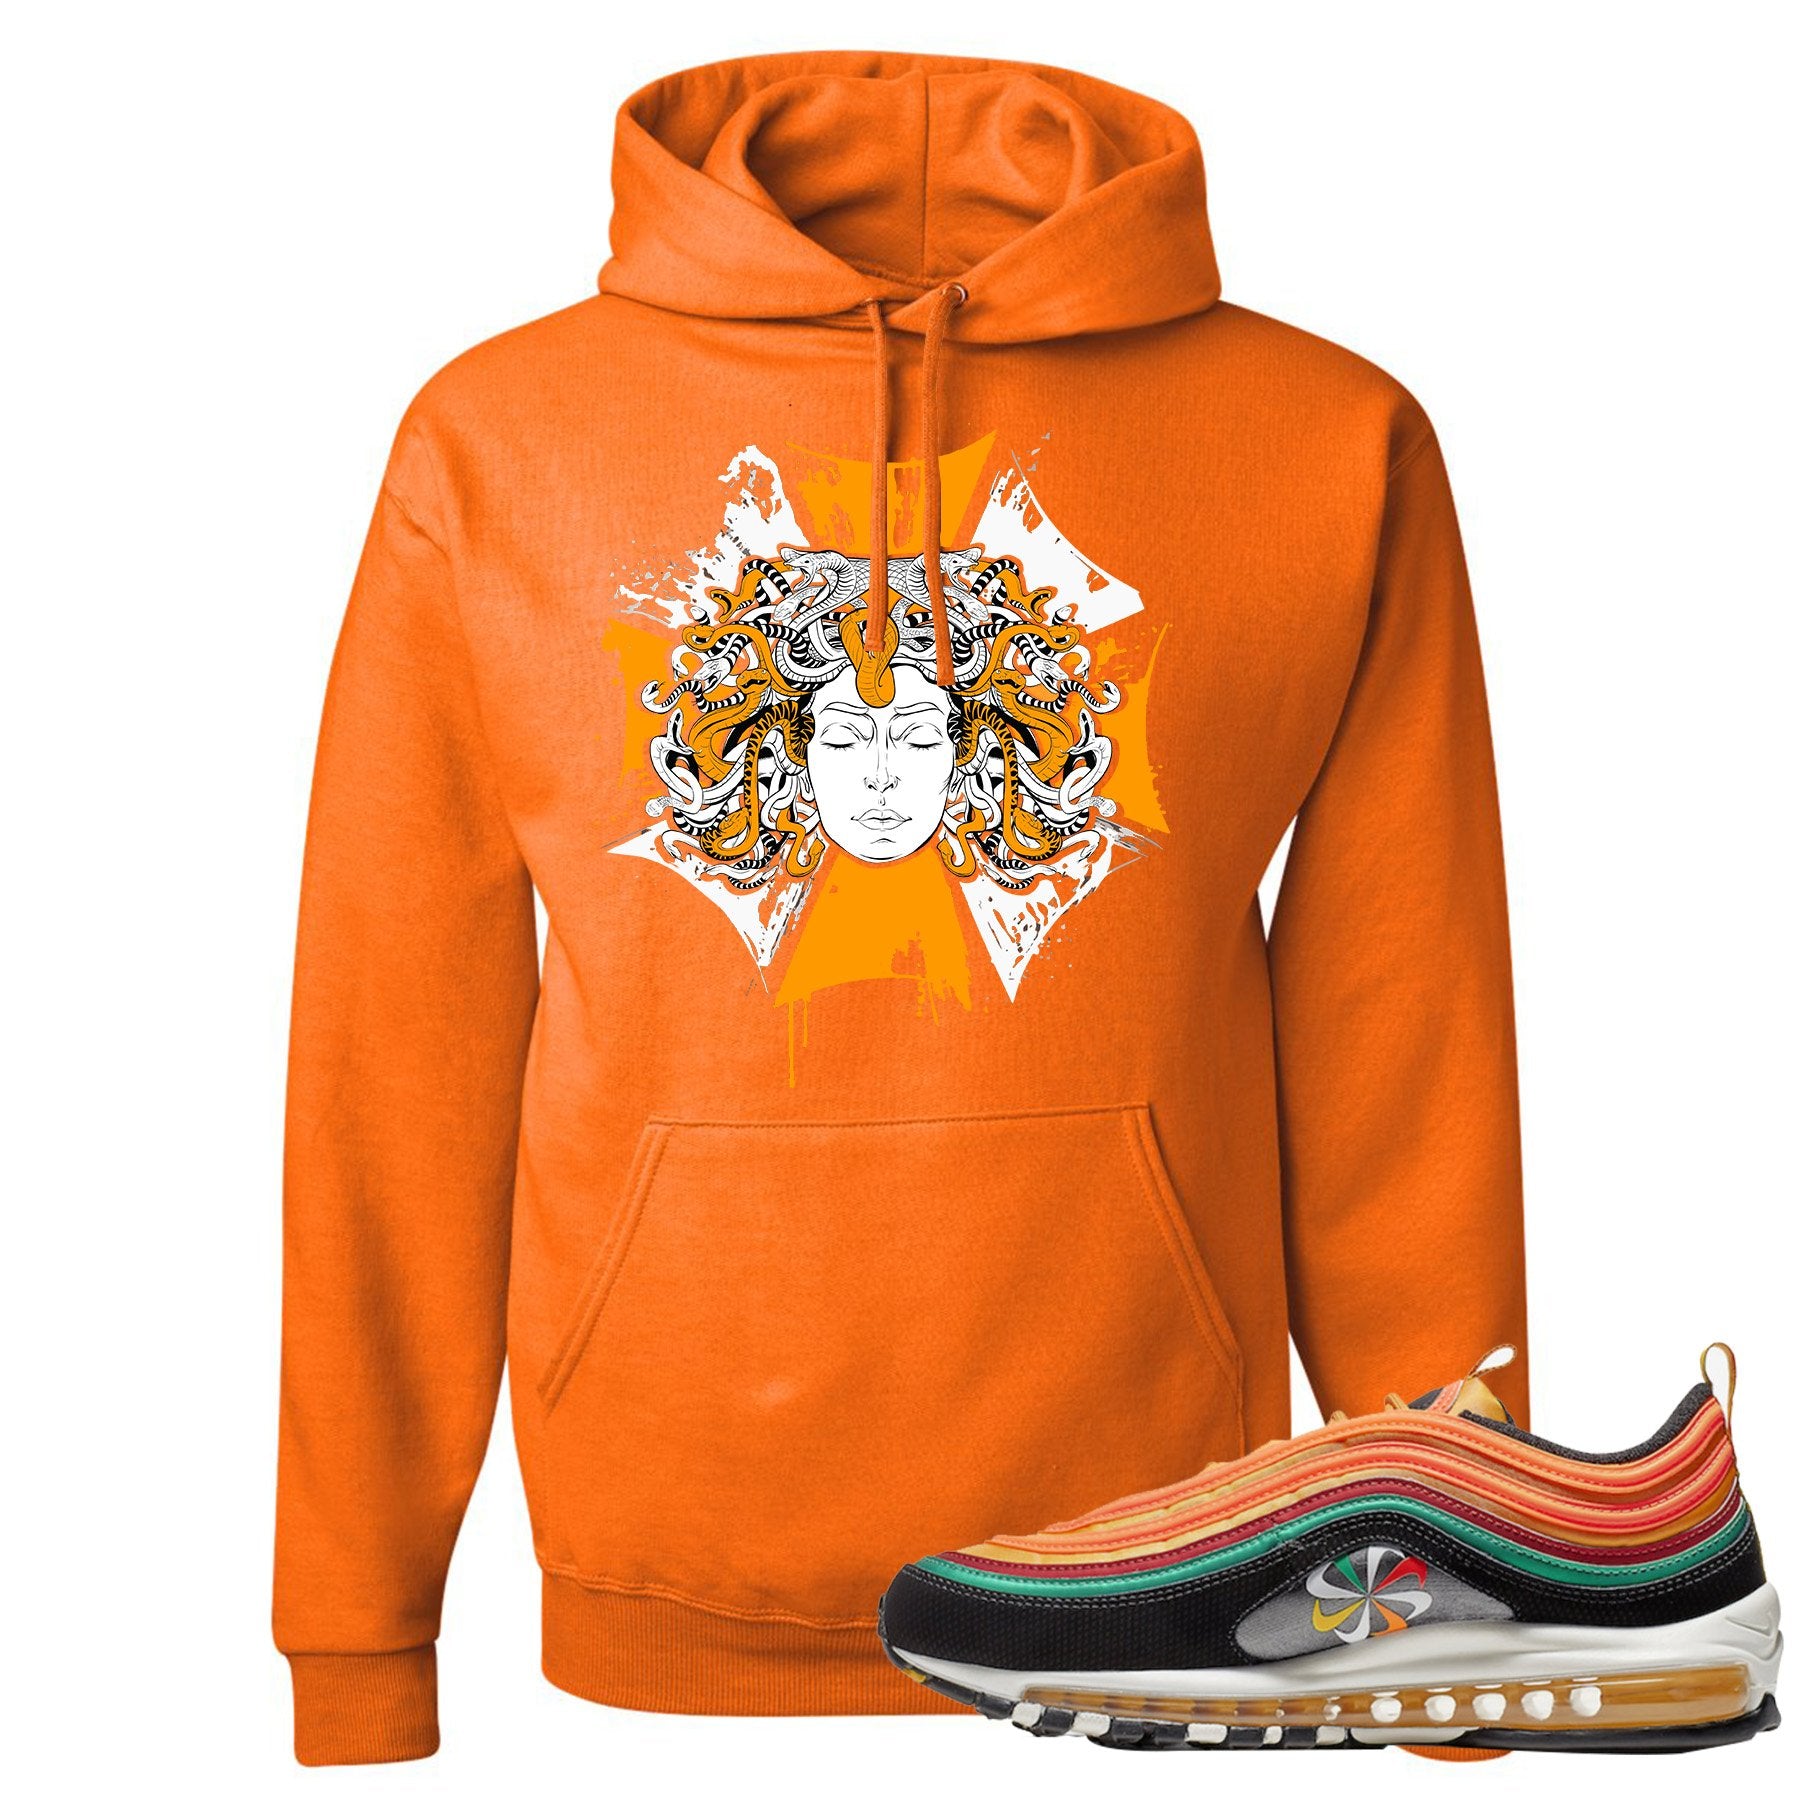 Printed on the front of the Air Max 97 Sunburst safety orange sneaker matching pullover hoodie is the Medusa sunburst logo